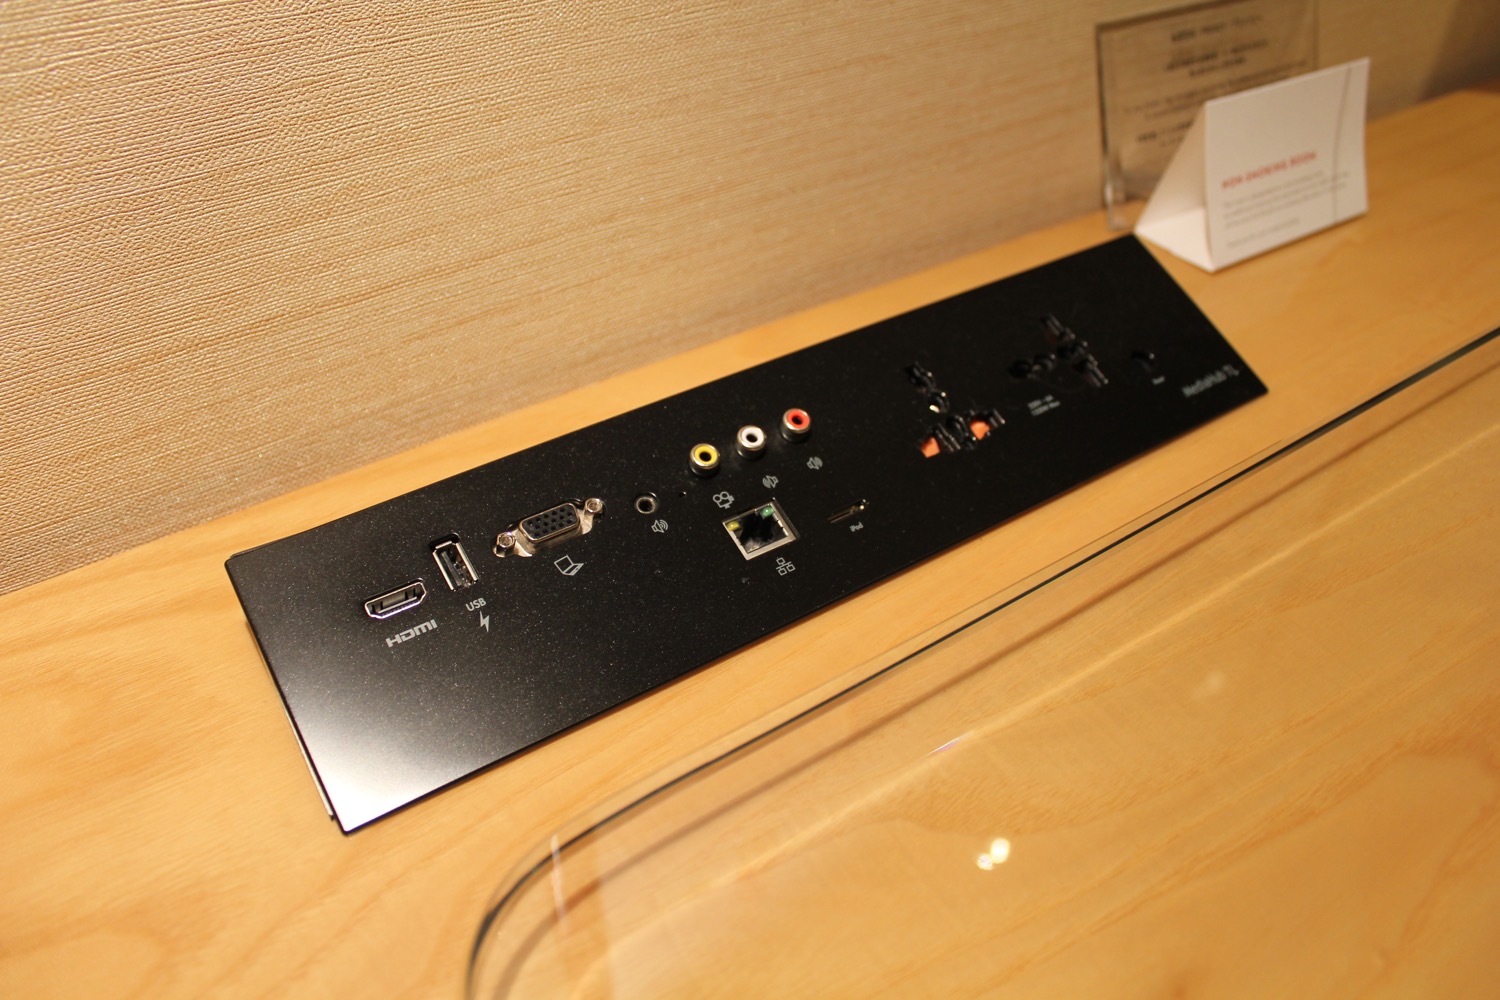 a black rectangular object with ports and wires